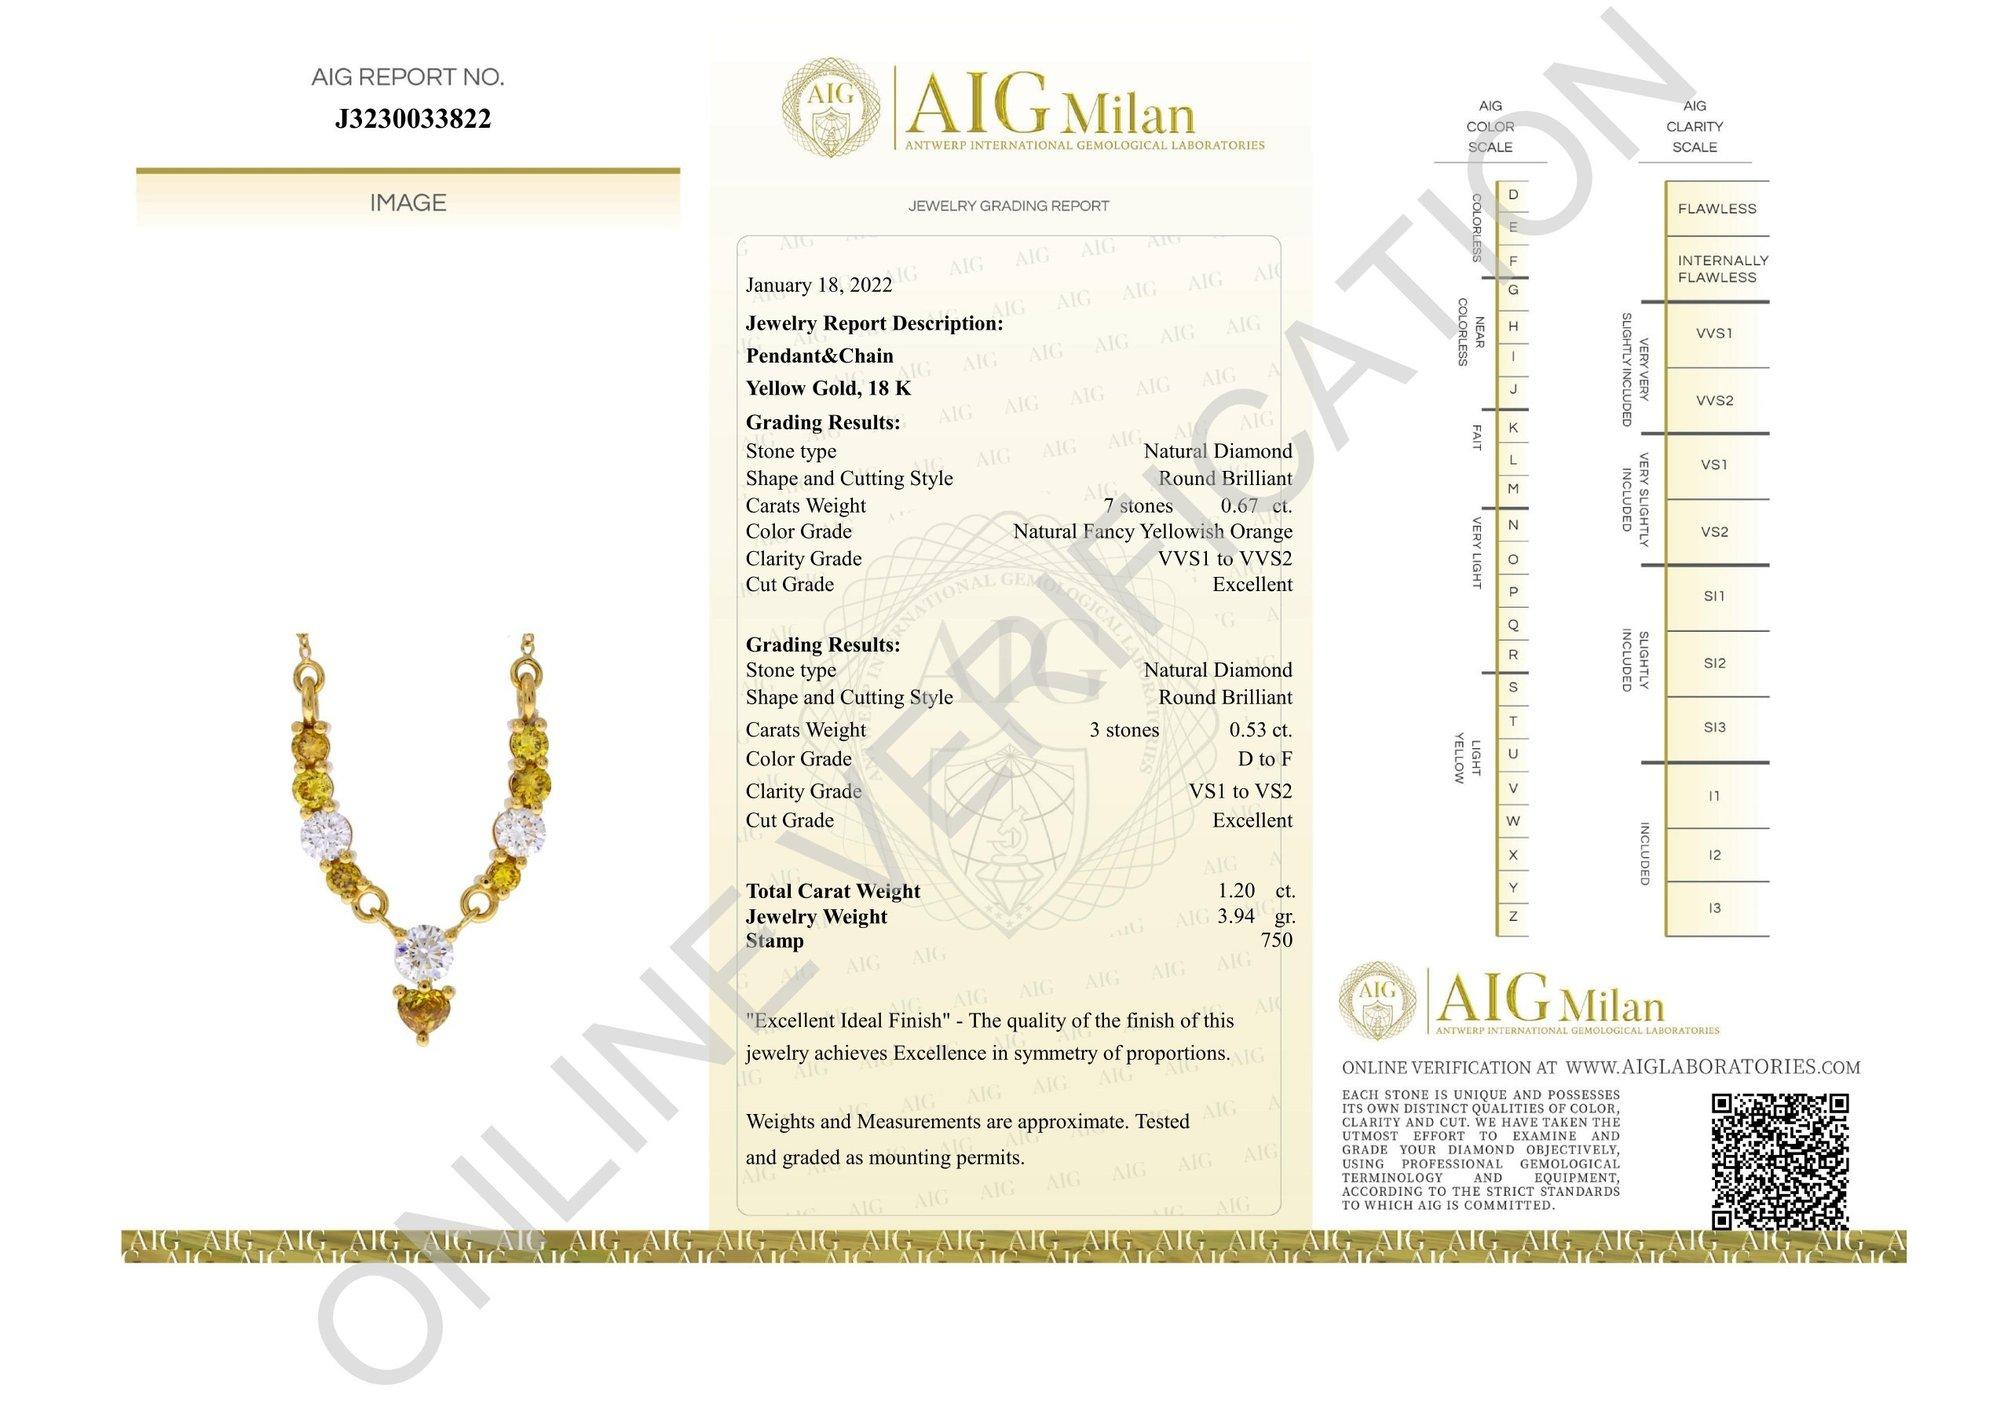 necklace in 18 k yellow gold with White and natural fancy colors diamonds  

-7 diamond main stones of 0.0957 ct. each, total: 0.67 ct.
cut: round brilliant
color: natural fancy yellowish orange
clarity: VVS1-VVS2
cut grade: EX

-3 diamond side